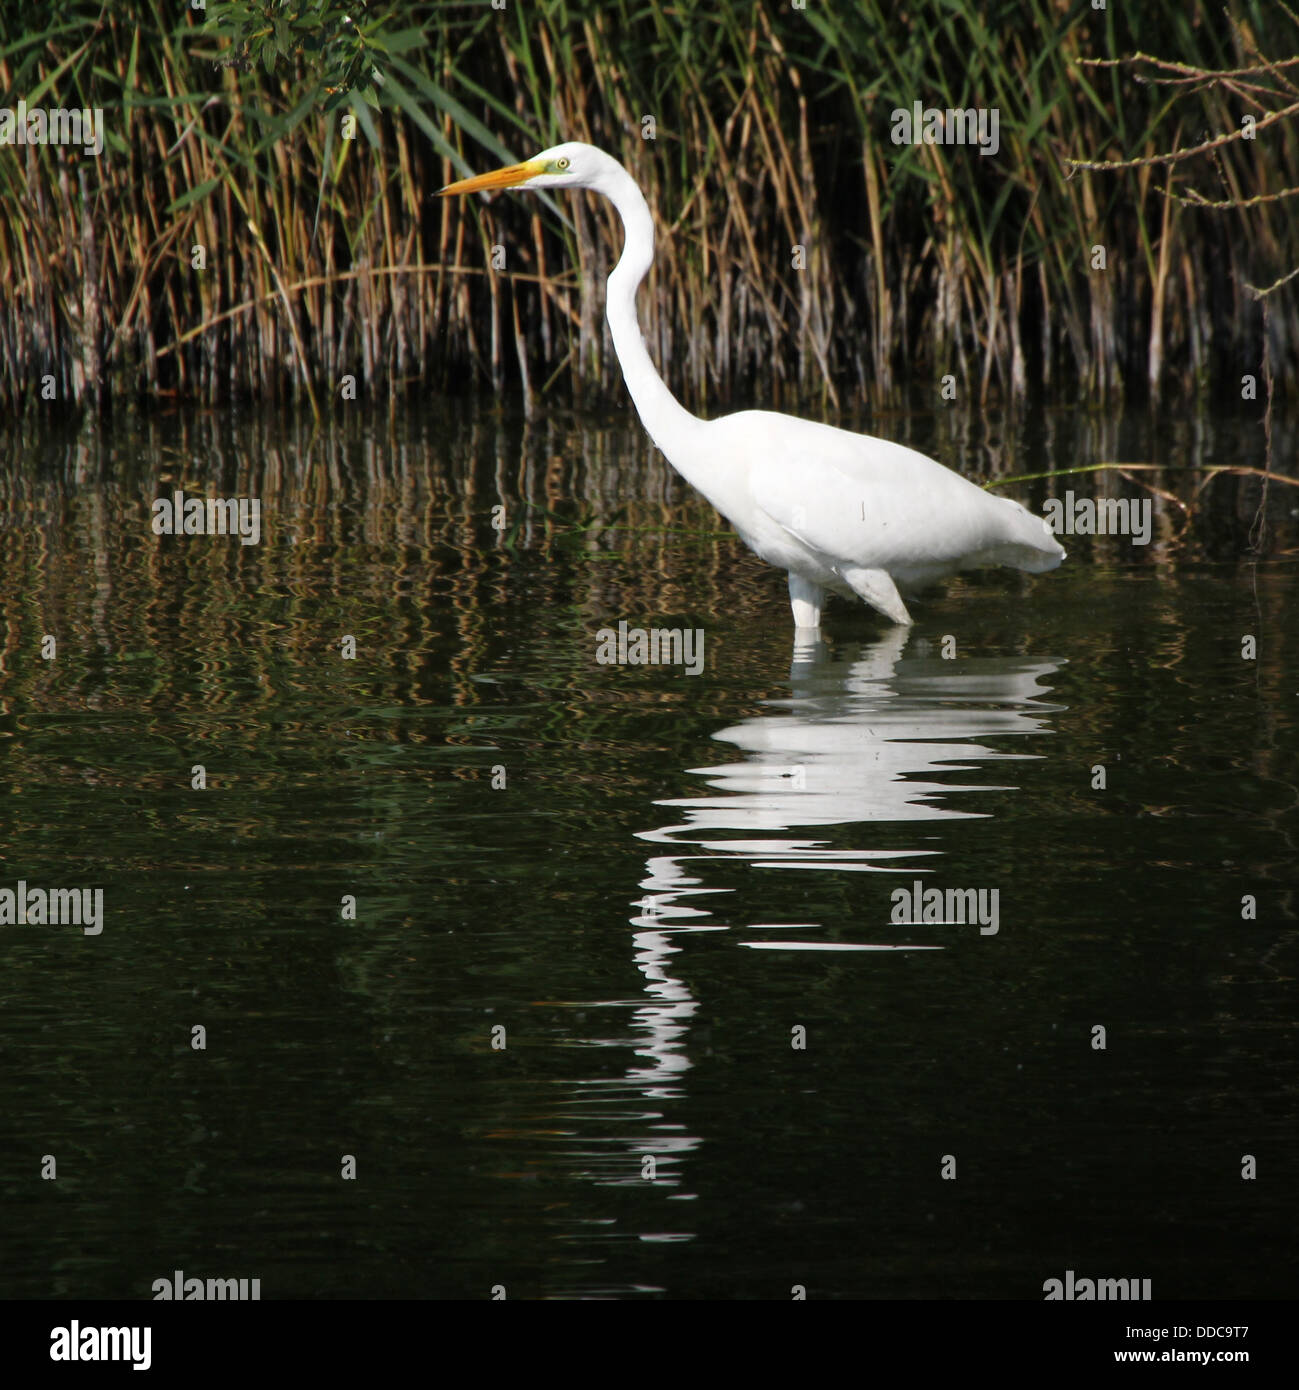 Detailed close-up of a Great White Egret (Ardea Alba) hunting for fish in marshy wetlands (nearly 100 Egret images in all) Stock Photo